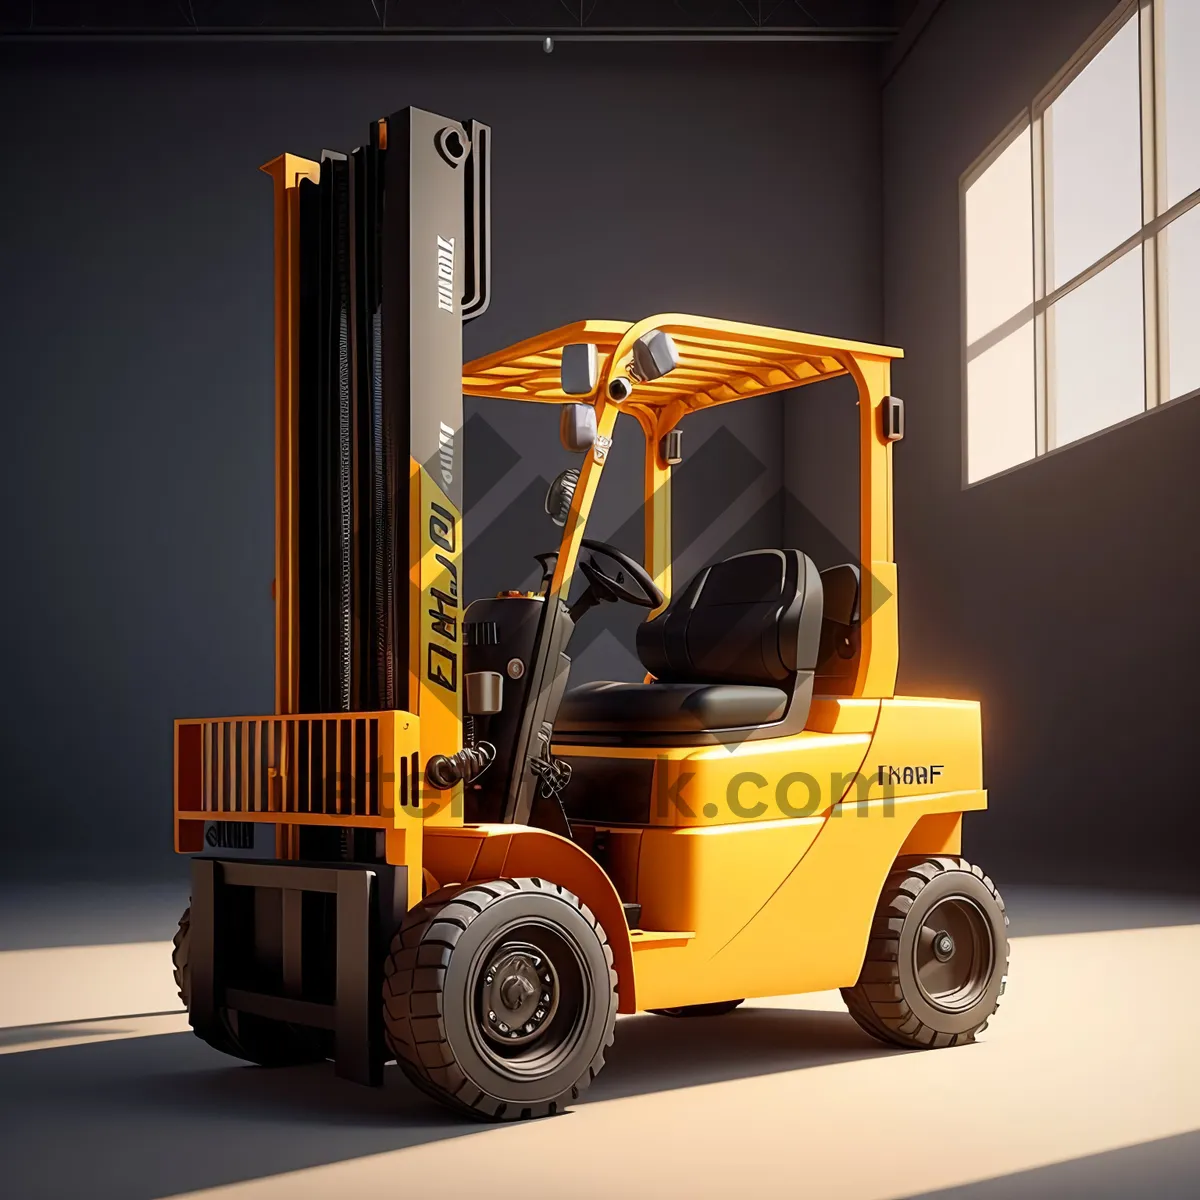 Picture of Yellow Hydraulic Forklift on Industrial Worksite